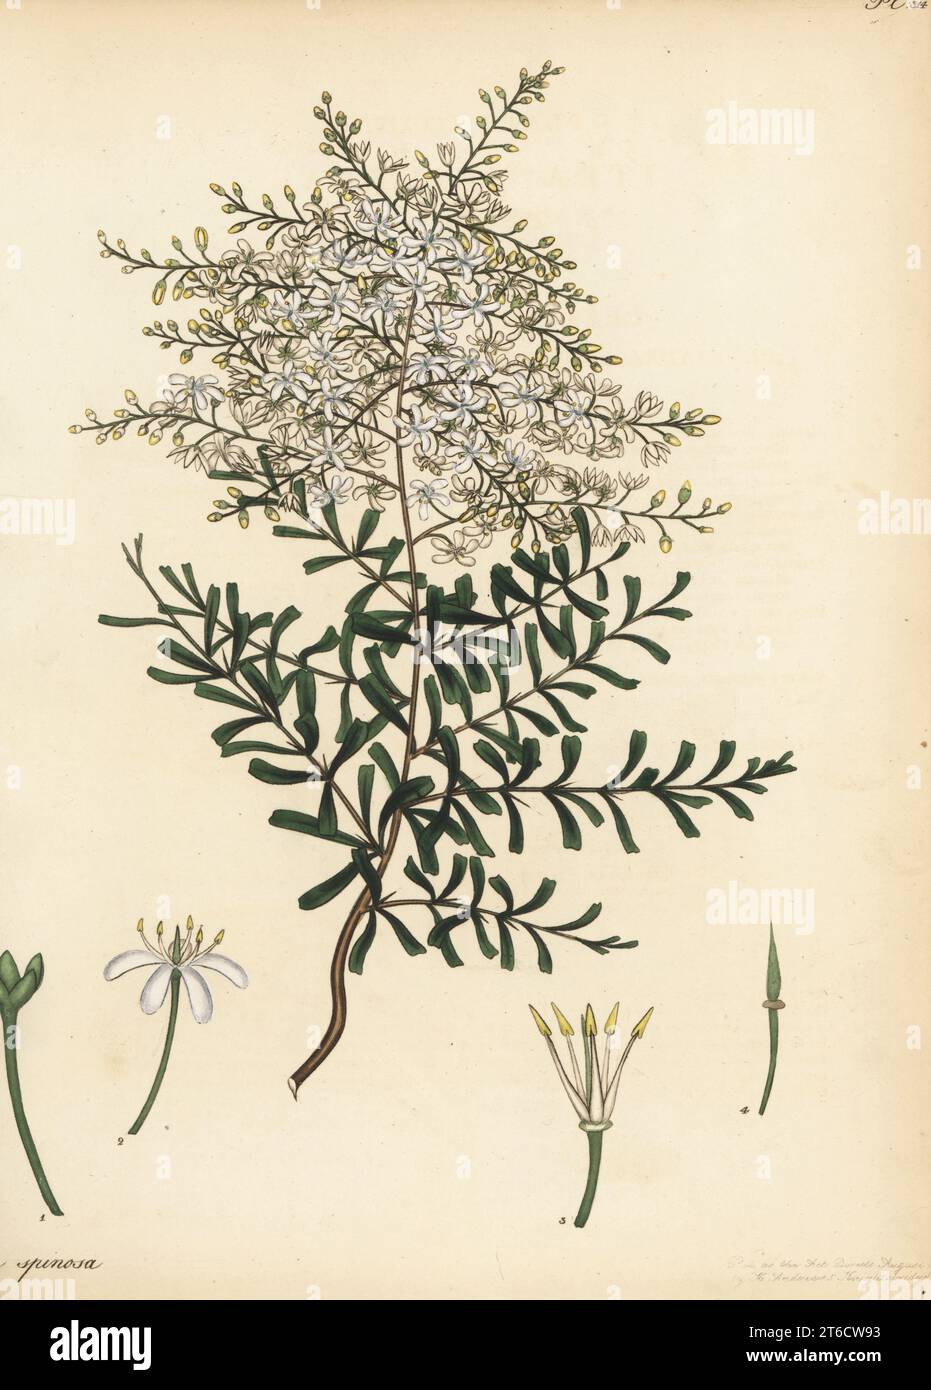 Bursaria spinosa. Thorny itea, Itea spinosa. From New Holland, Australia, in the garden collection of Mary Bright, the Marchioness of Rockingham. Copperplate engraving drawn, engraved and hand-coloured by Henry Andrews from his Botanical Register, Volume 5, self-published in Knightsbridge, London, 1803. Stock Photo